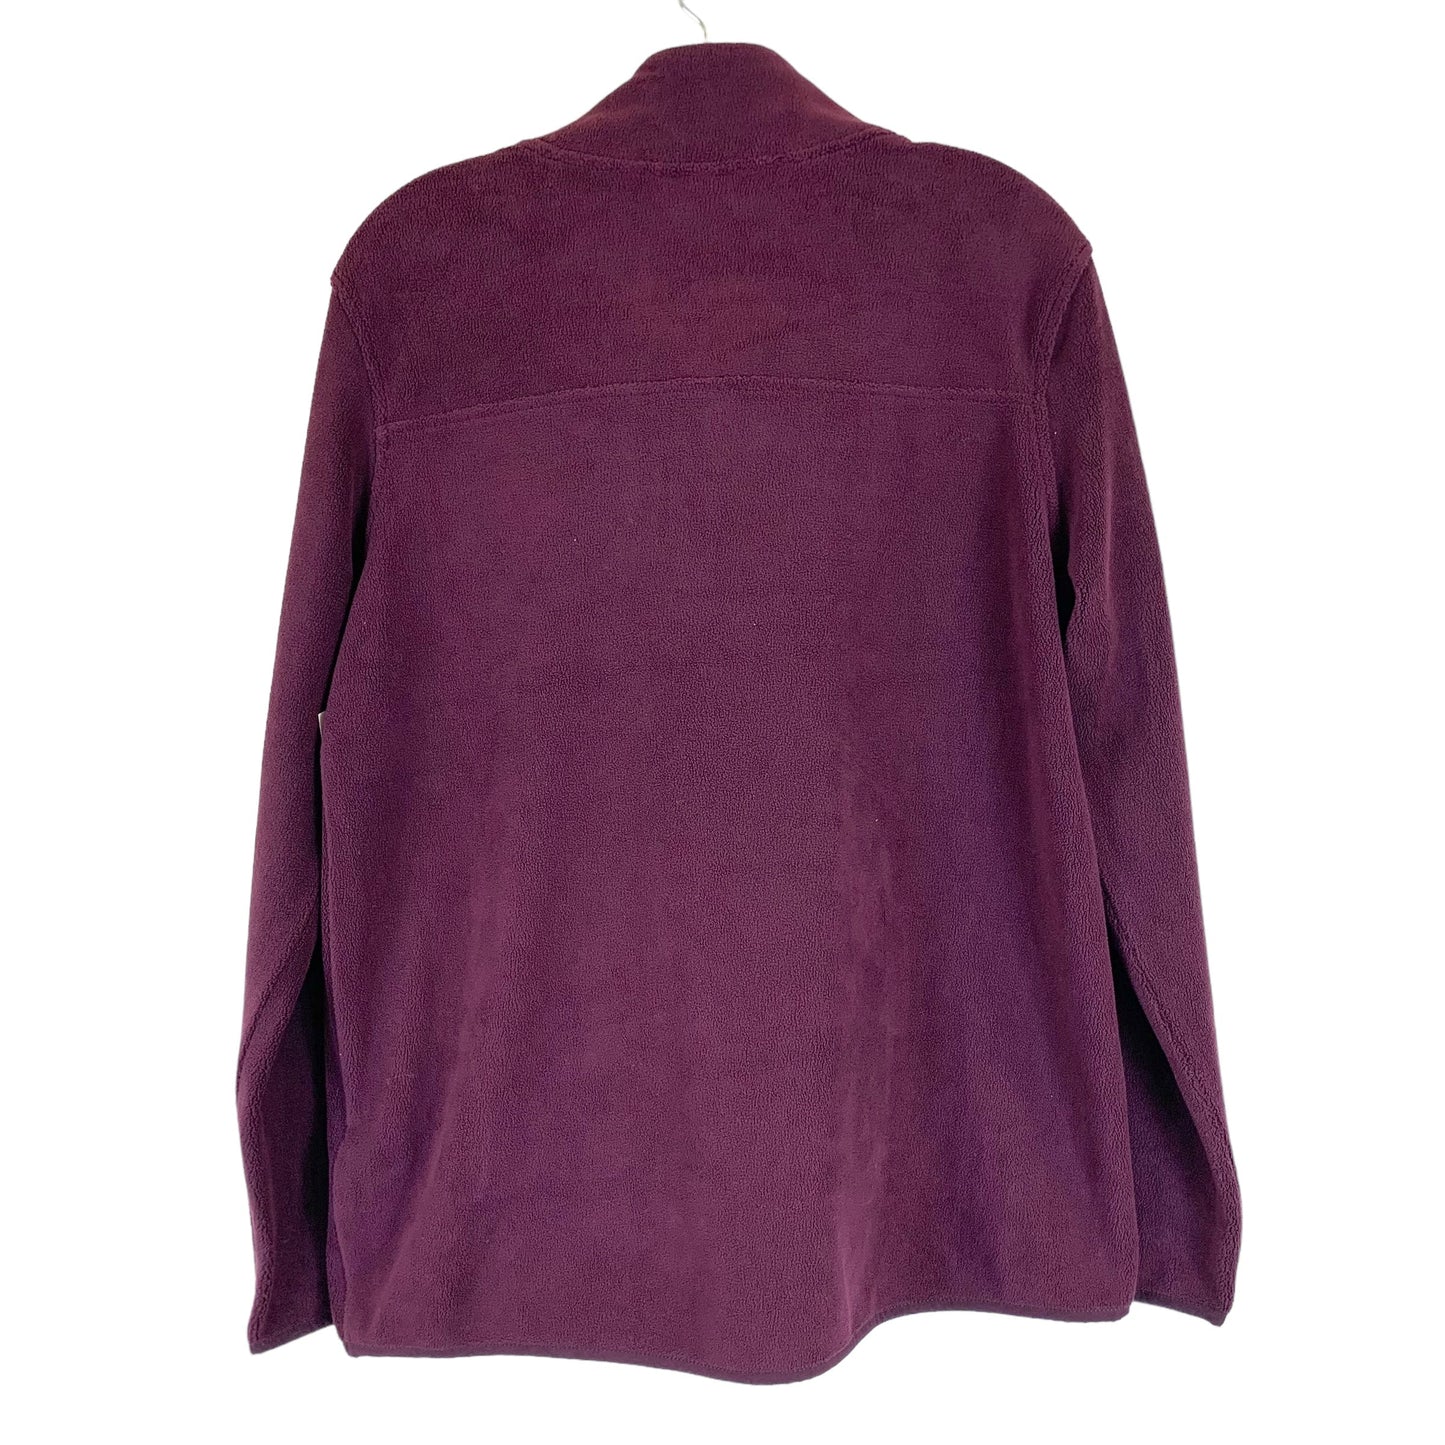 Purple Top Long Sleeve 32 Degrees, Size M